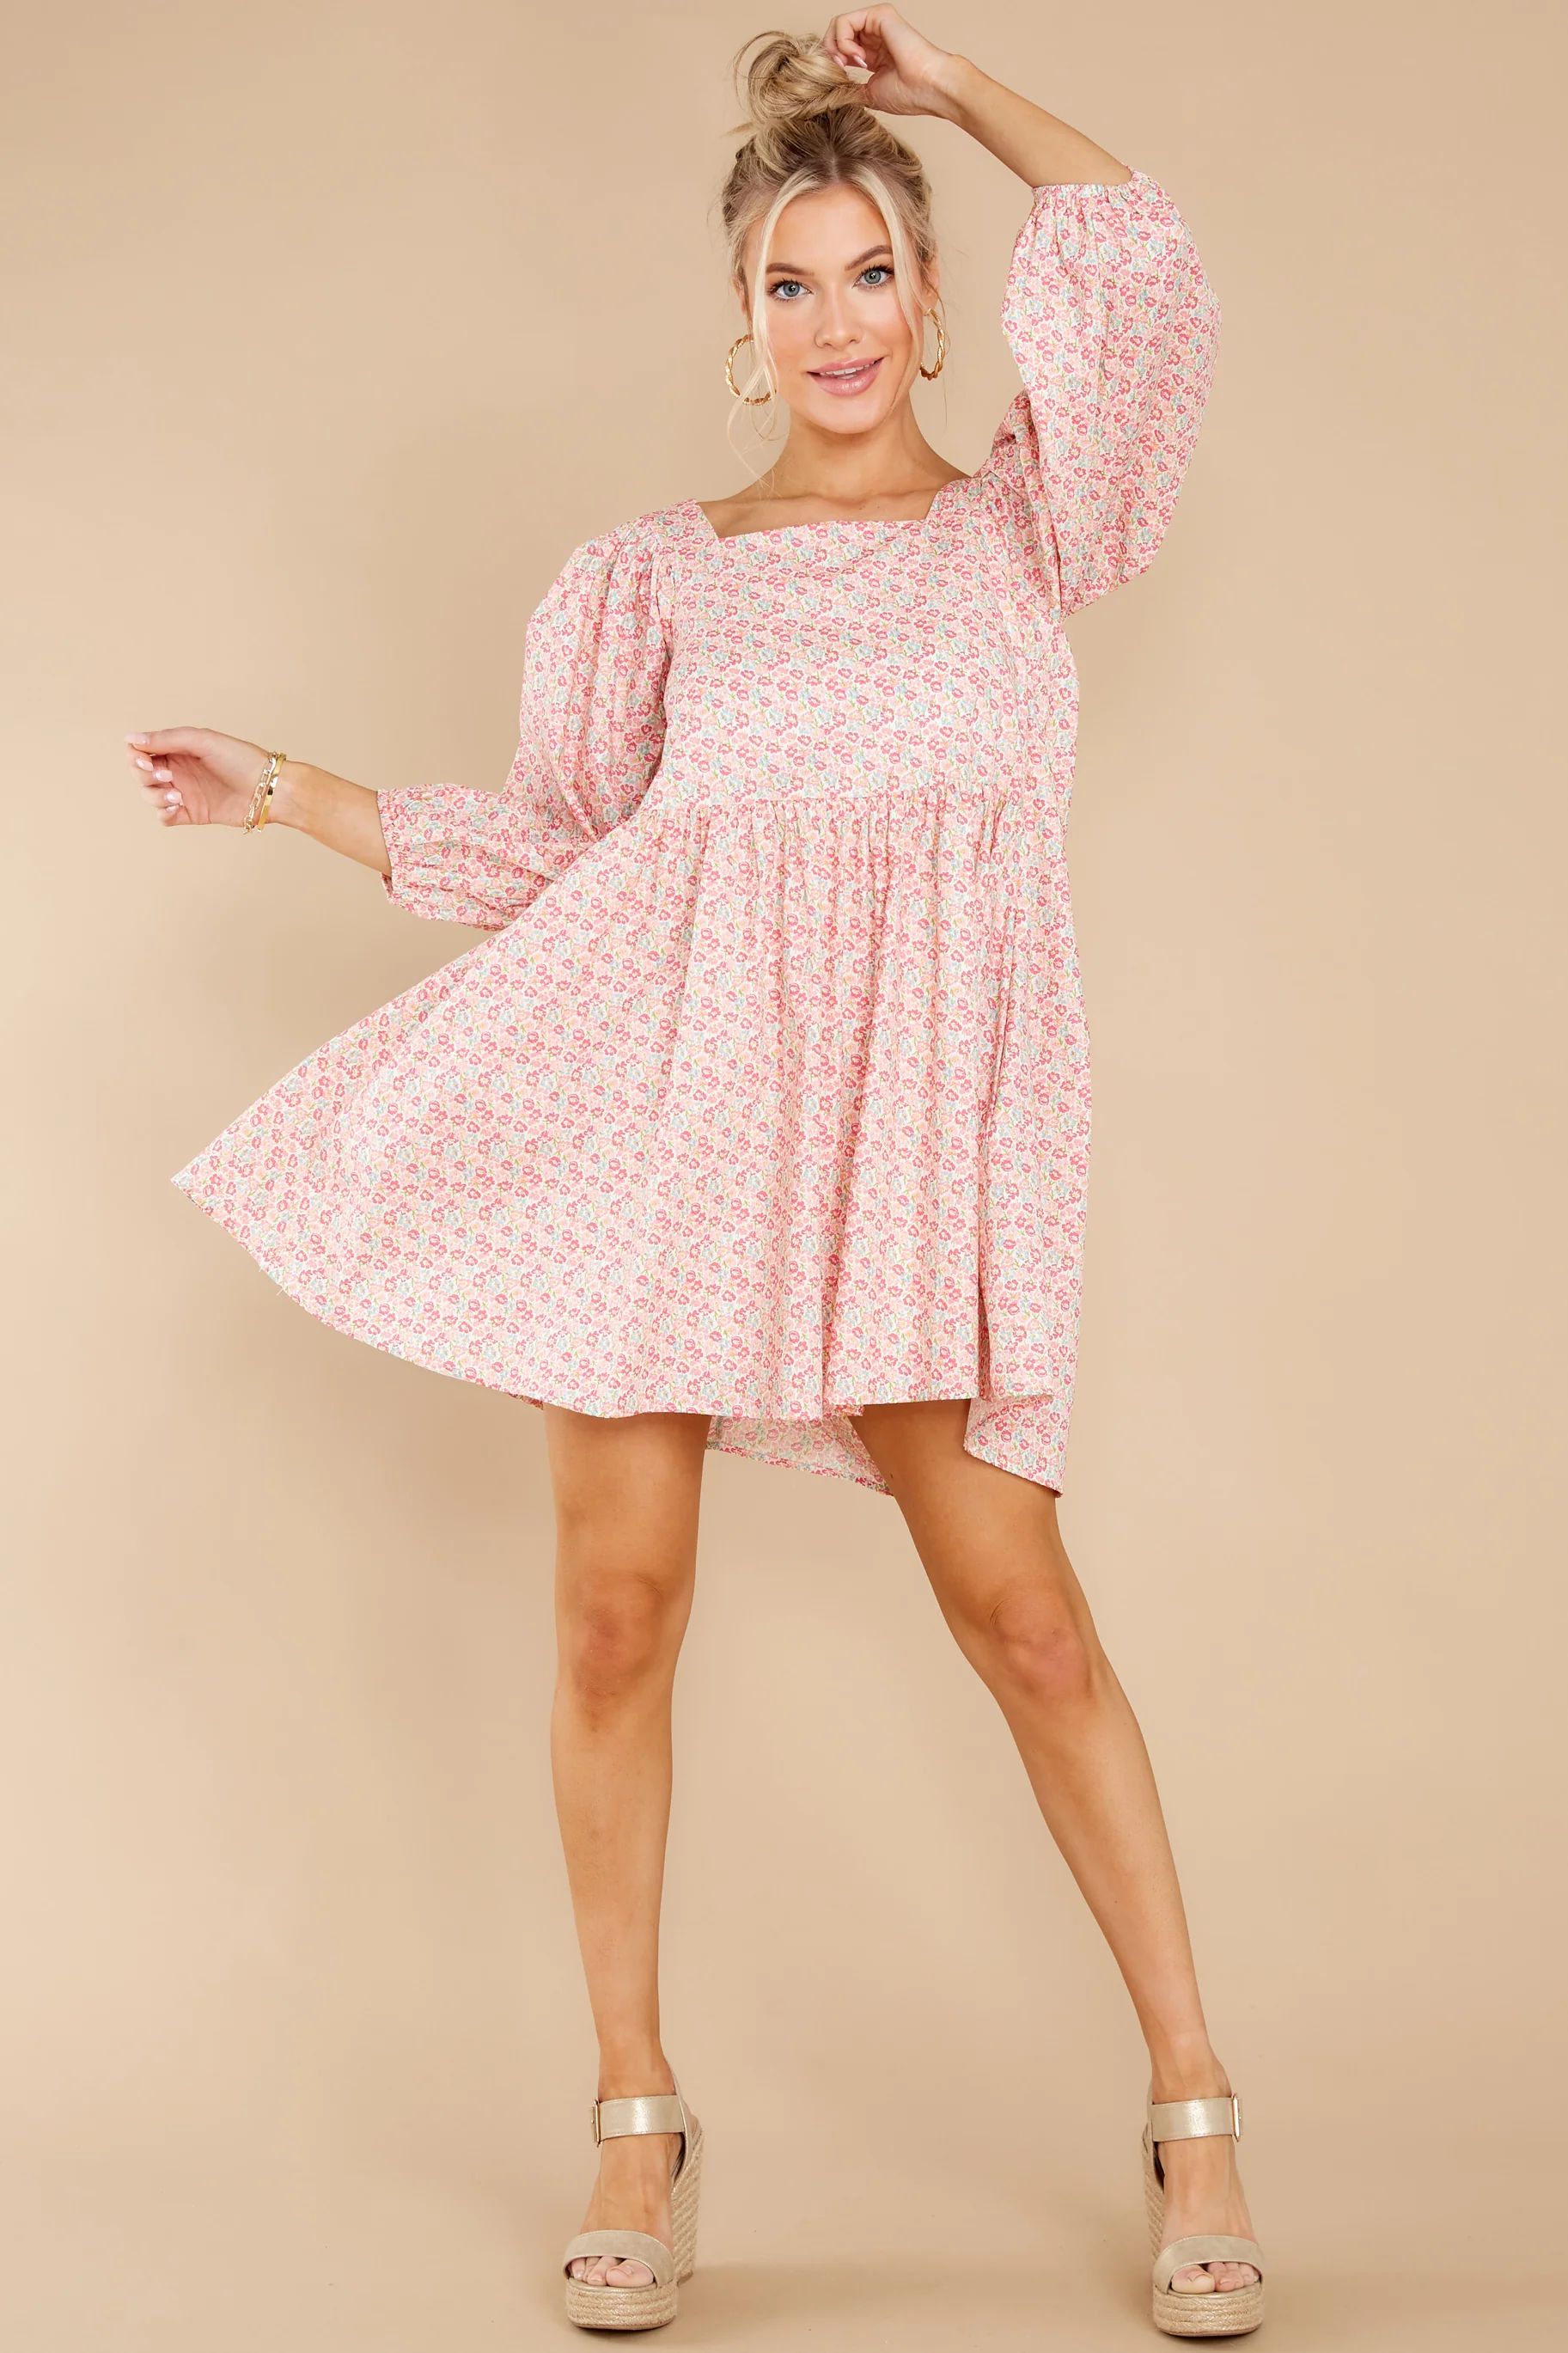 It's Your Choice Pink Floral Print Dress | Red Dress 